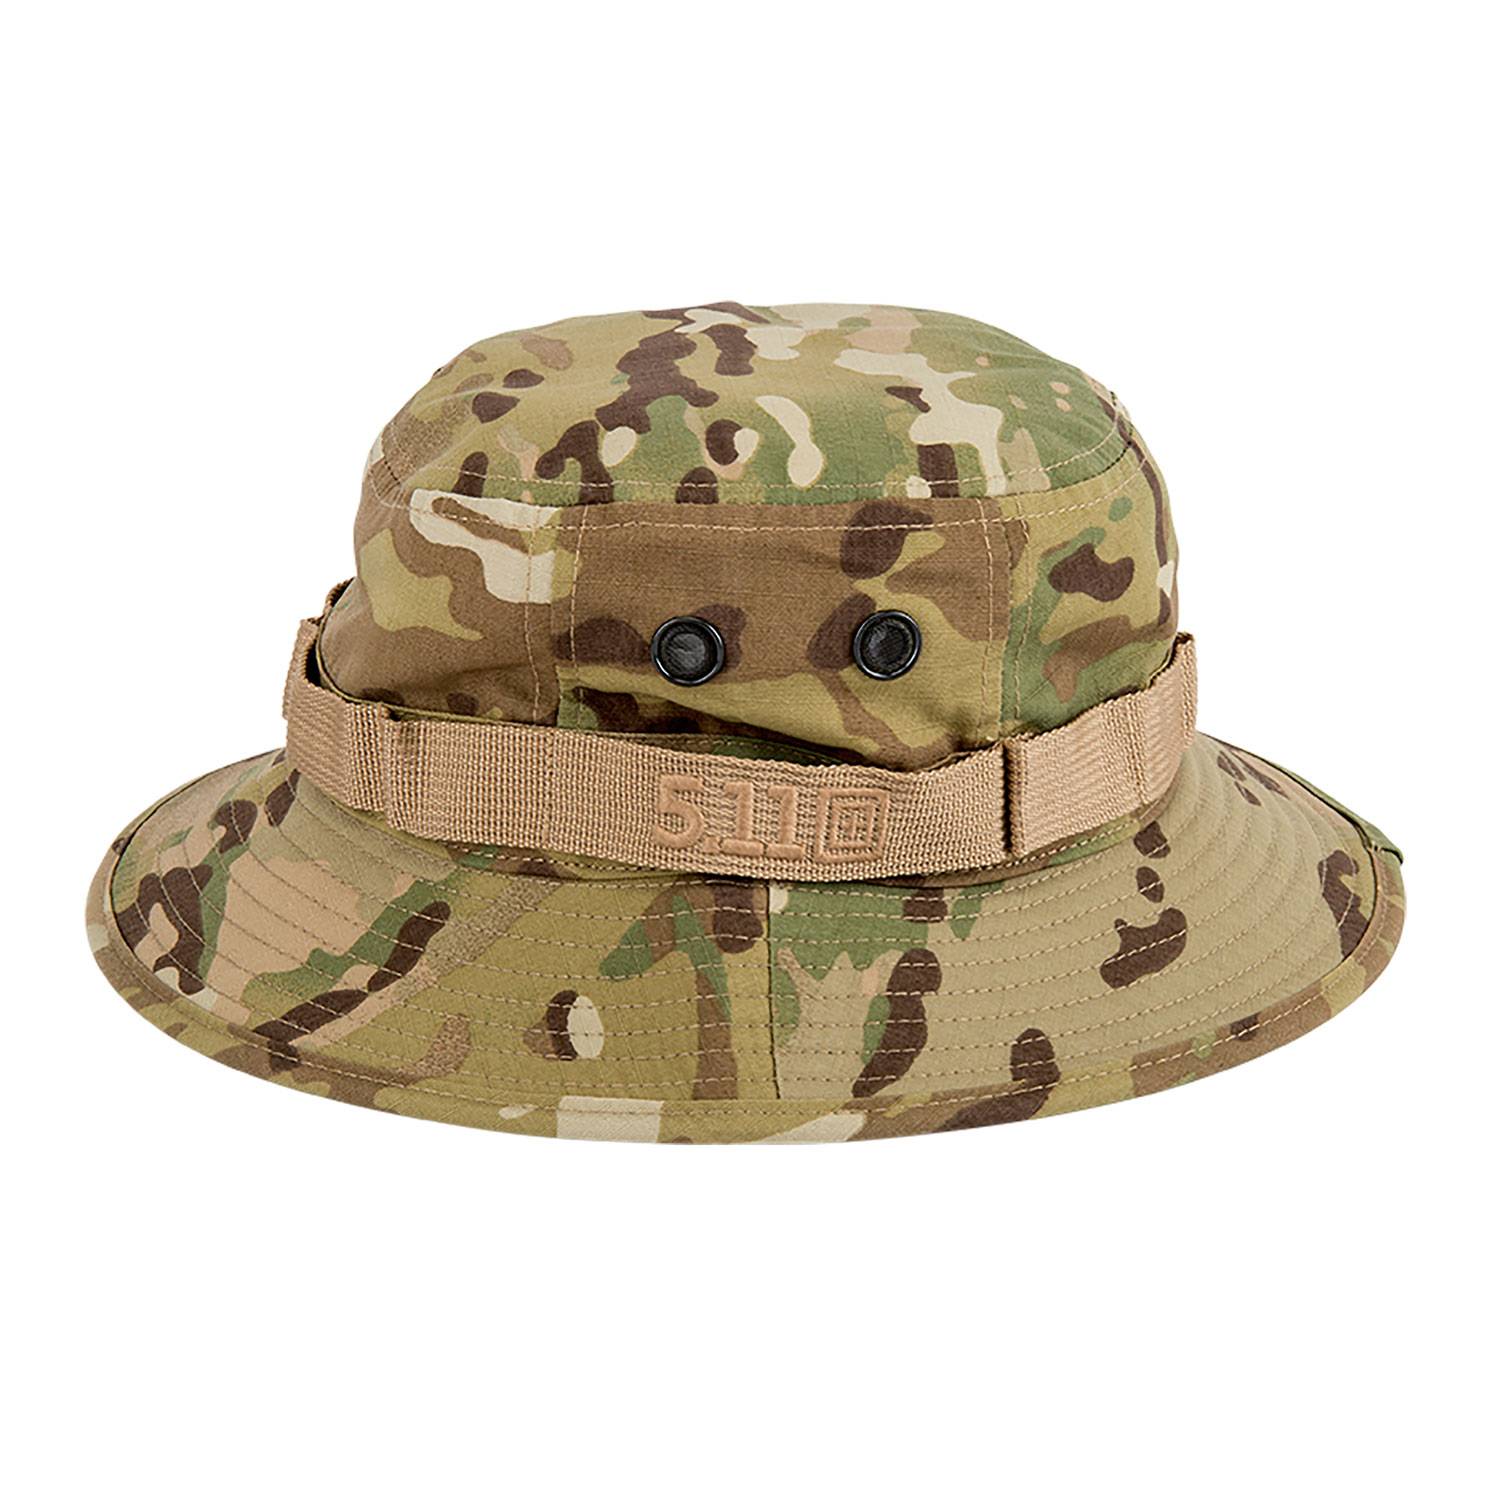 5.11 TACTICAL BOONIE HAT